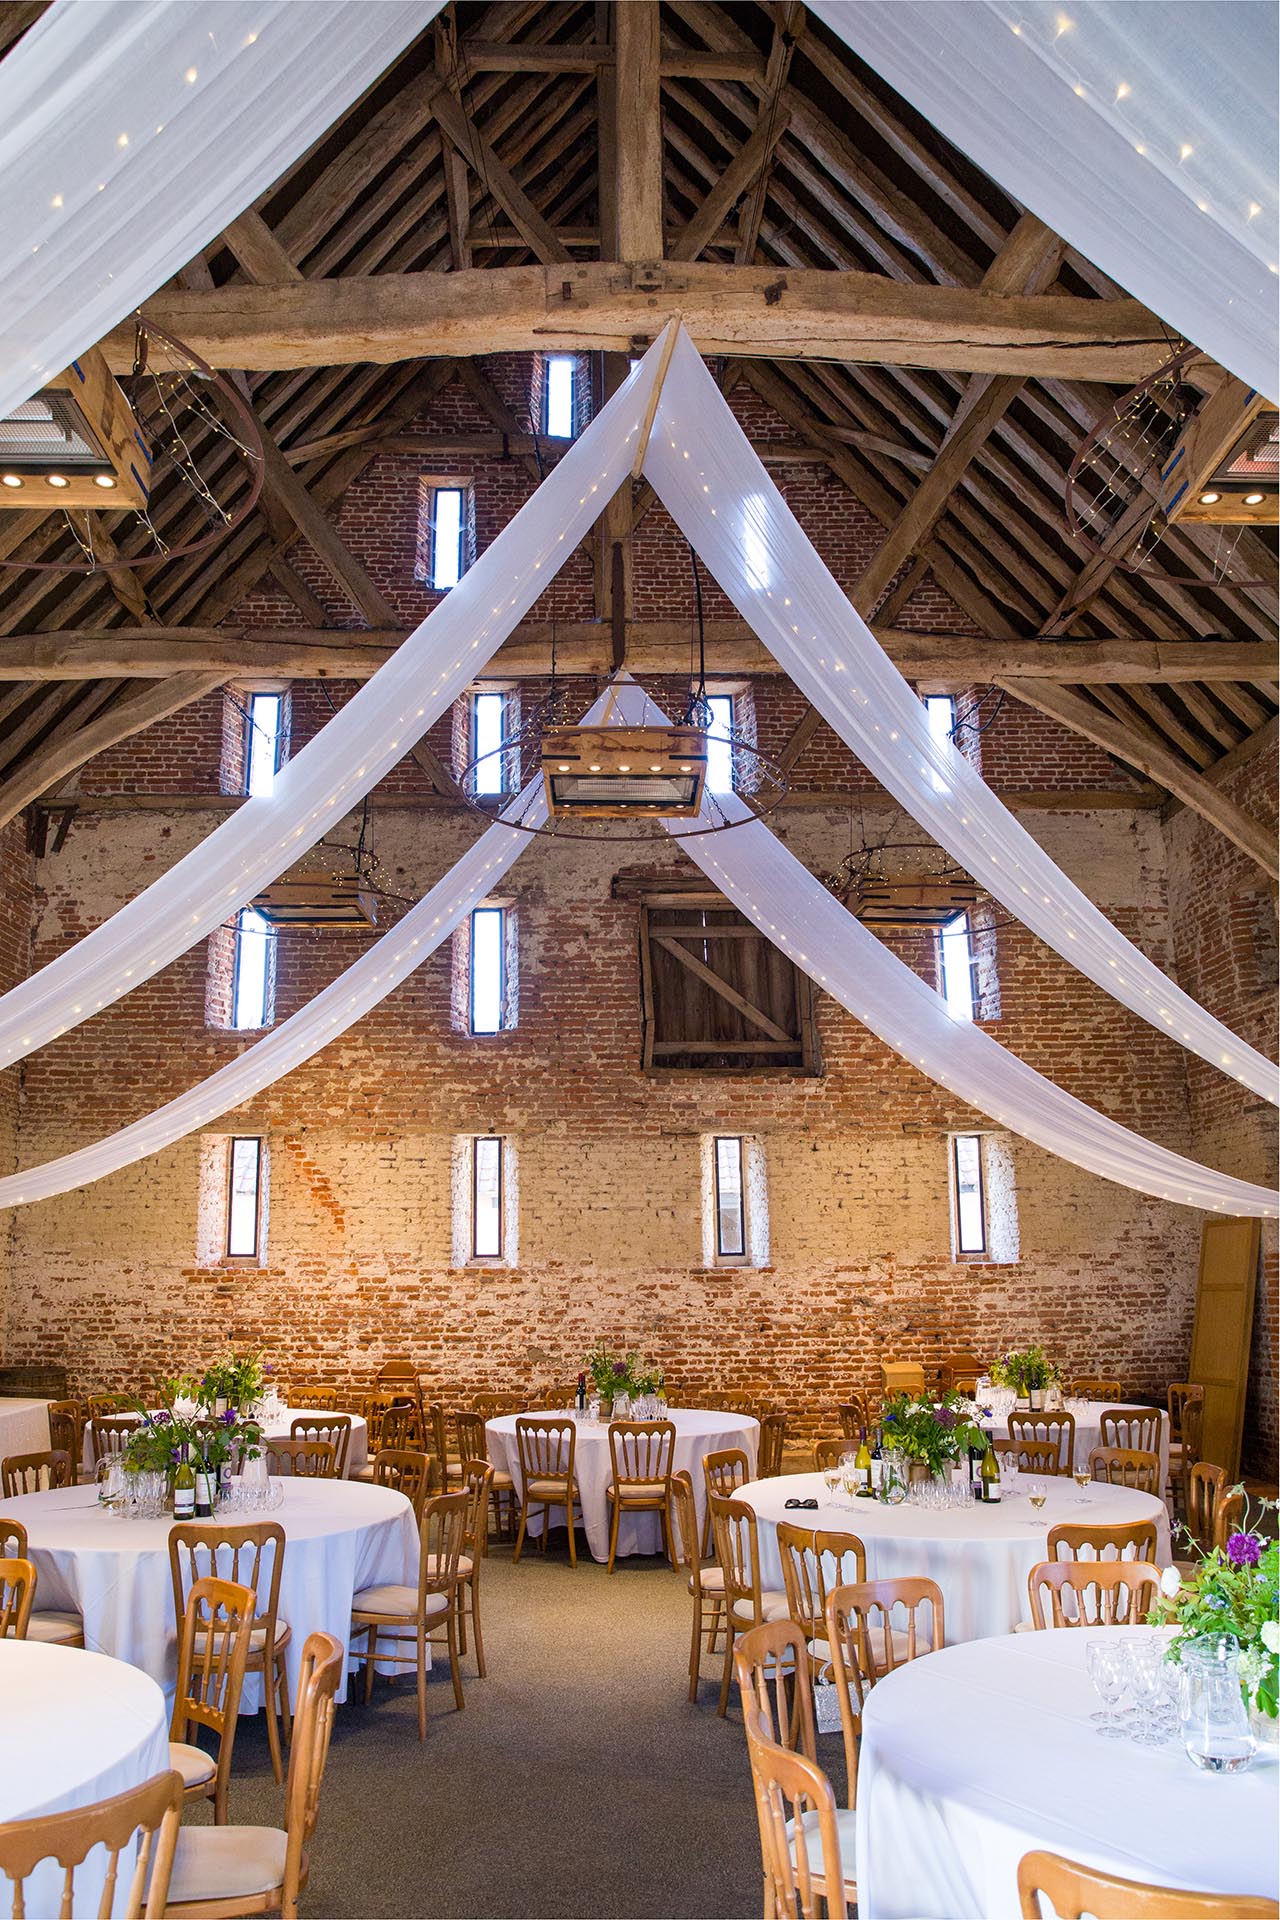 Anne of Cleves Barn by Essex wedding photographer at Great Lodge, Great Bardfield